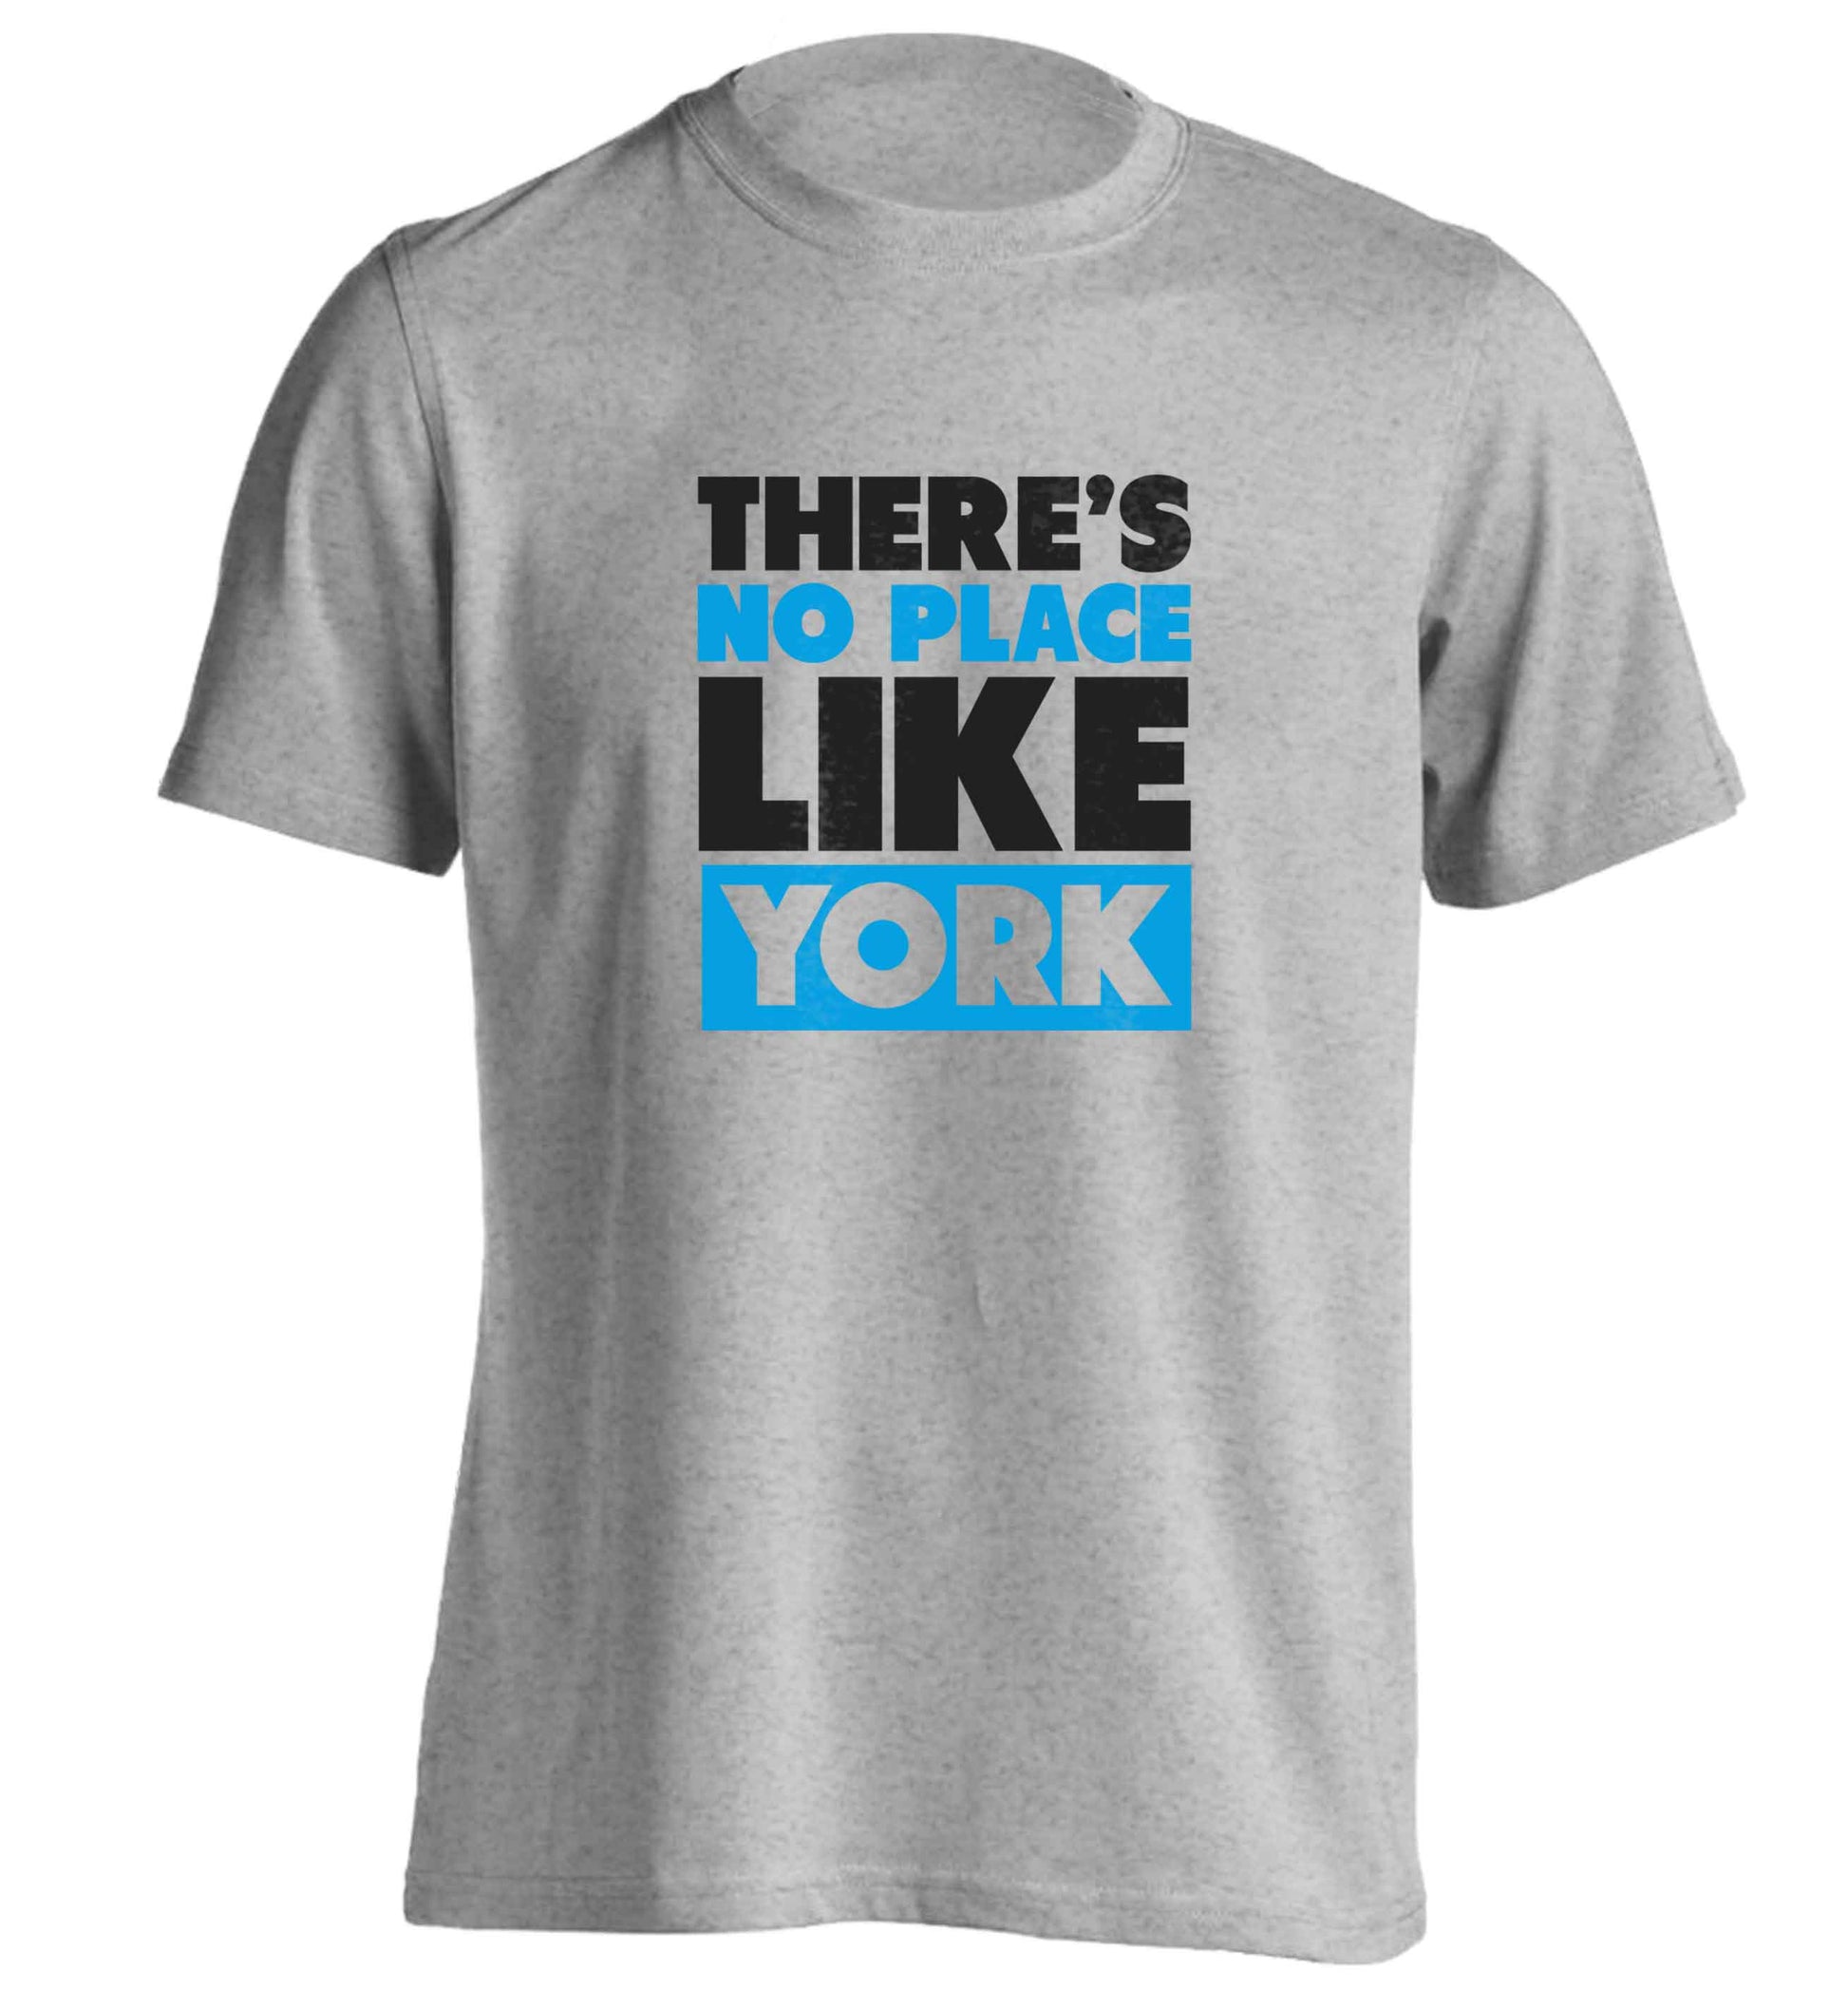 There's no place like york adults unisex grey Tshirt 2XL